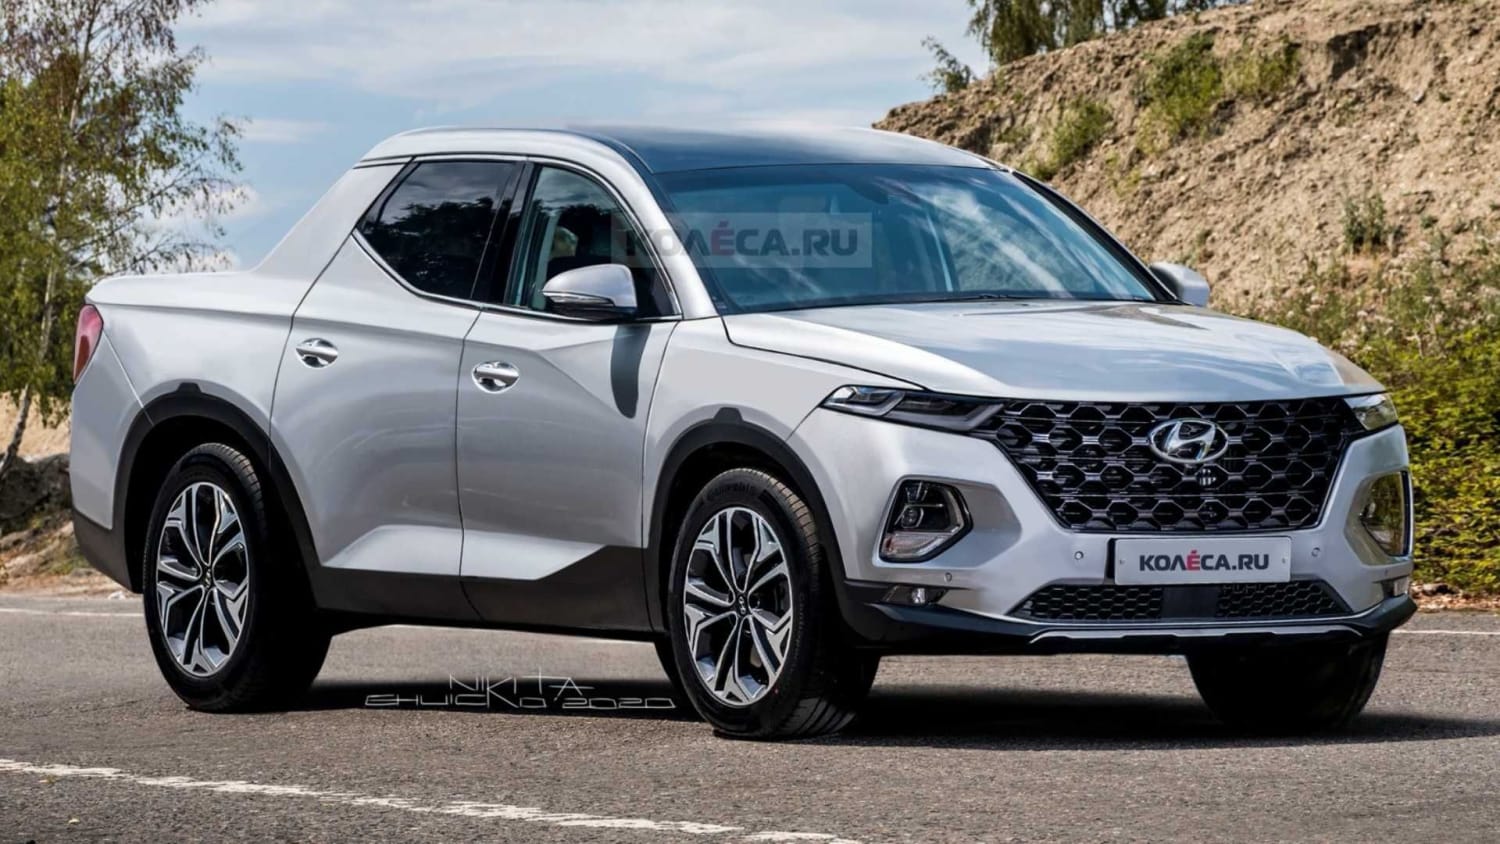 The new Hyundai Santa Cruz will have the front of the Tucson